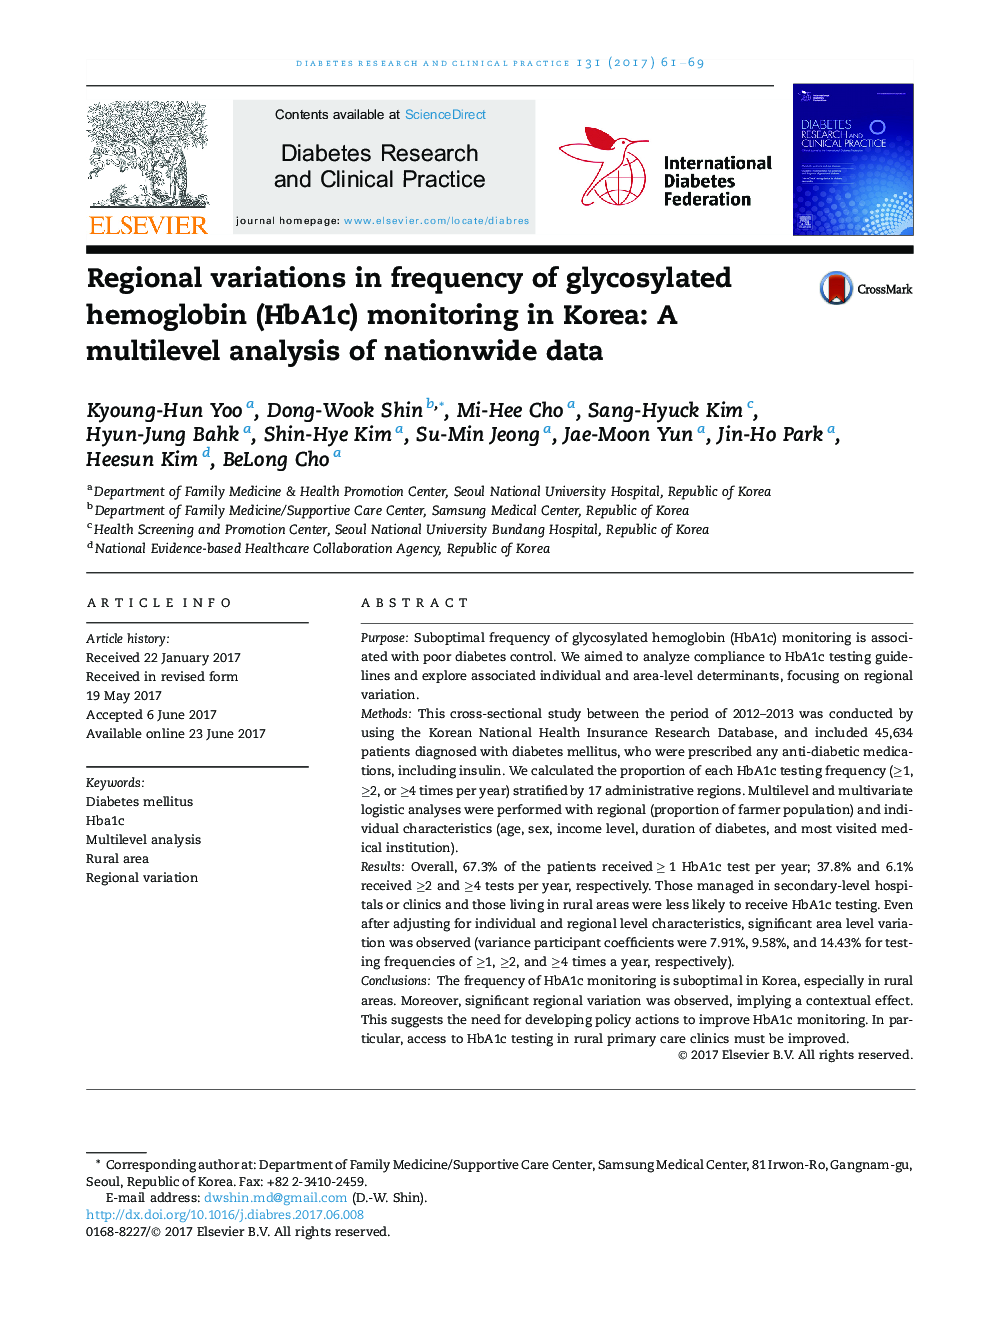 Regional variations in frequency of glycosylated hemoglobin (HbA1c) monitoring in Korea: A multilevel analysis of nationwide data